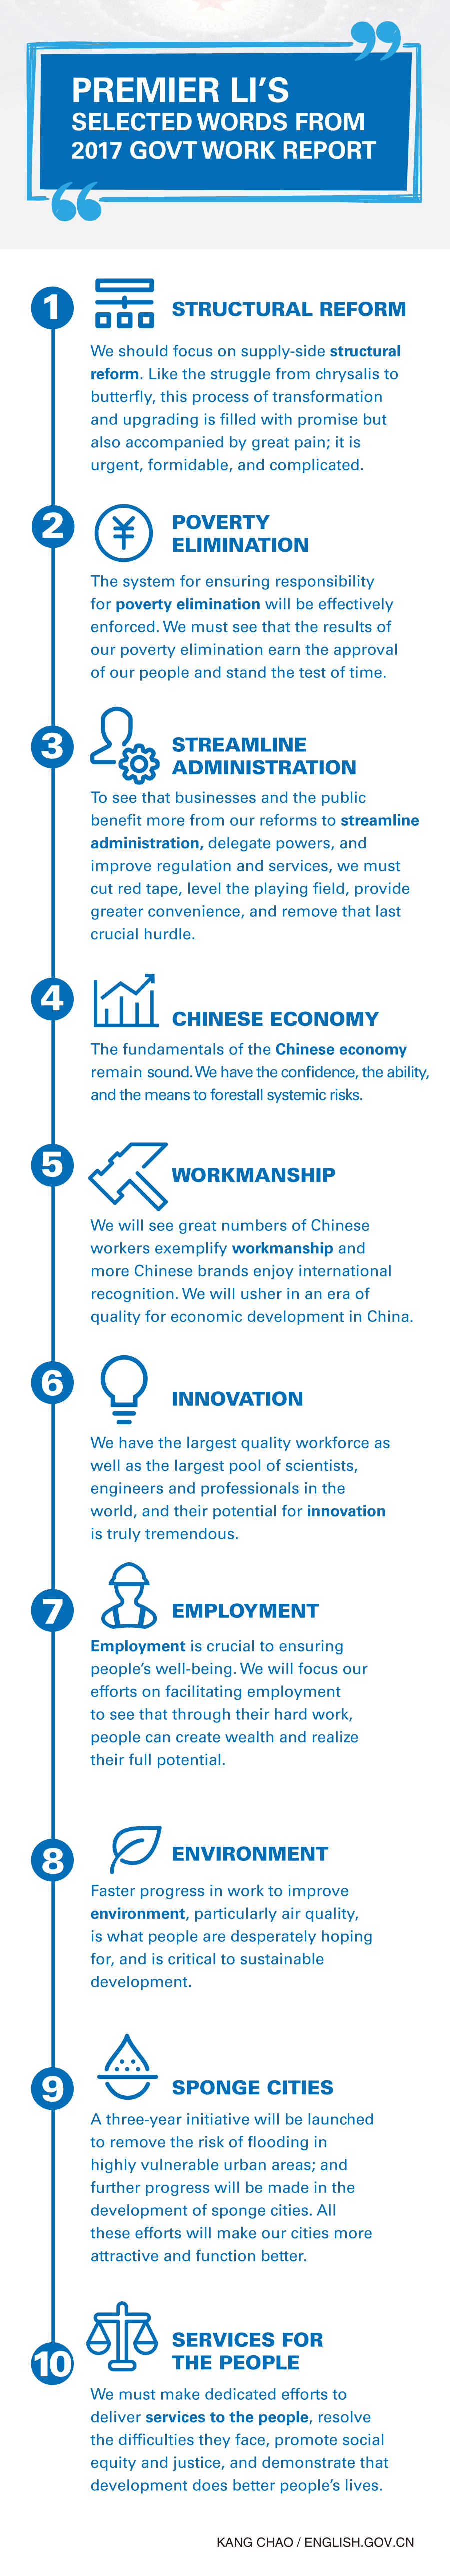 Infographic: Premier Li’s selected words from 2017 Govt Work Report